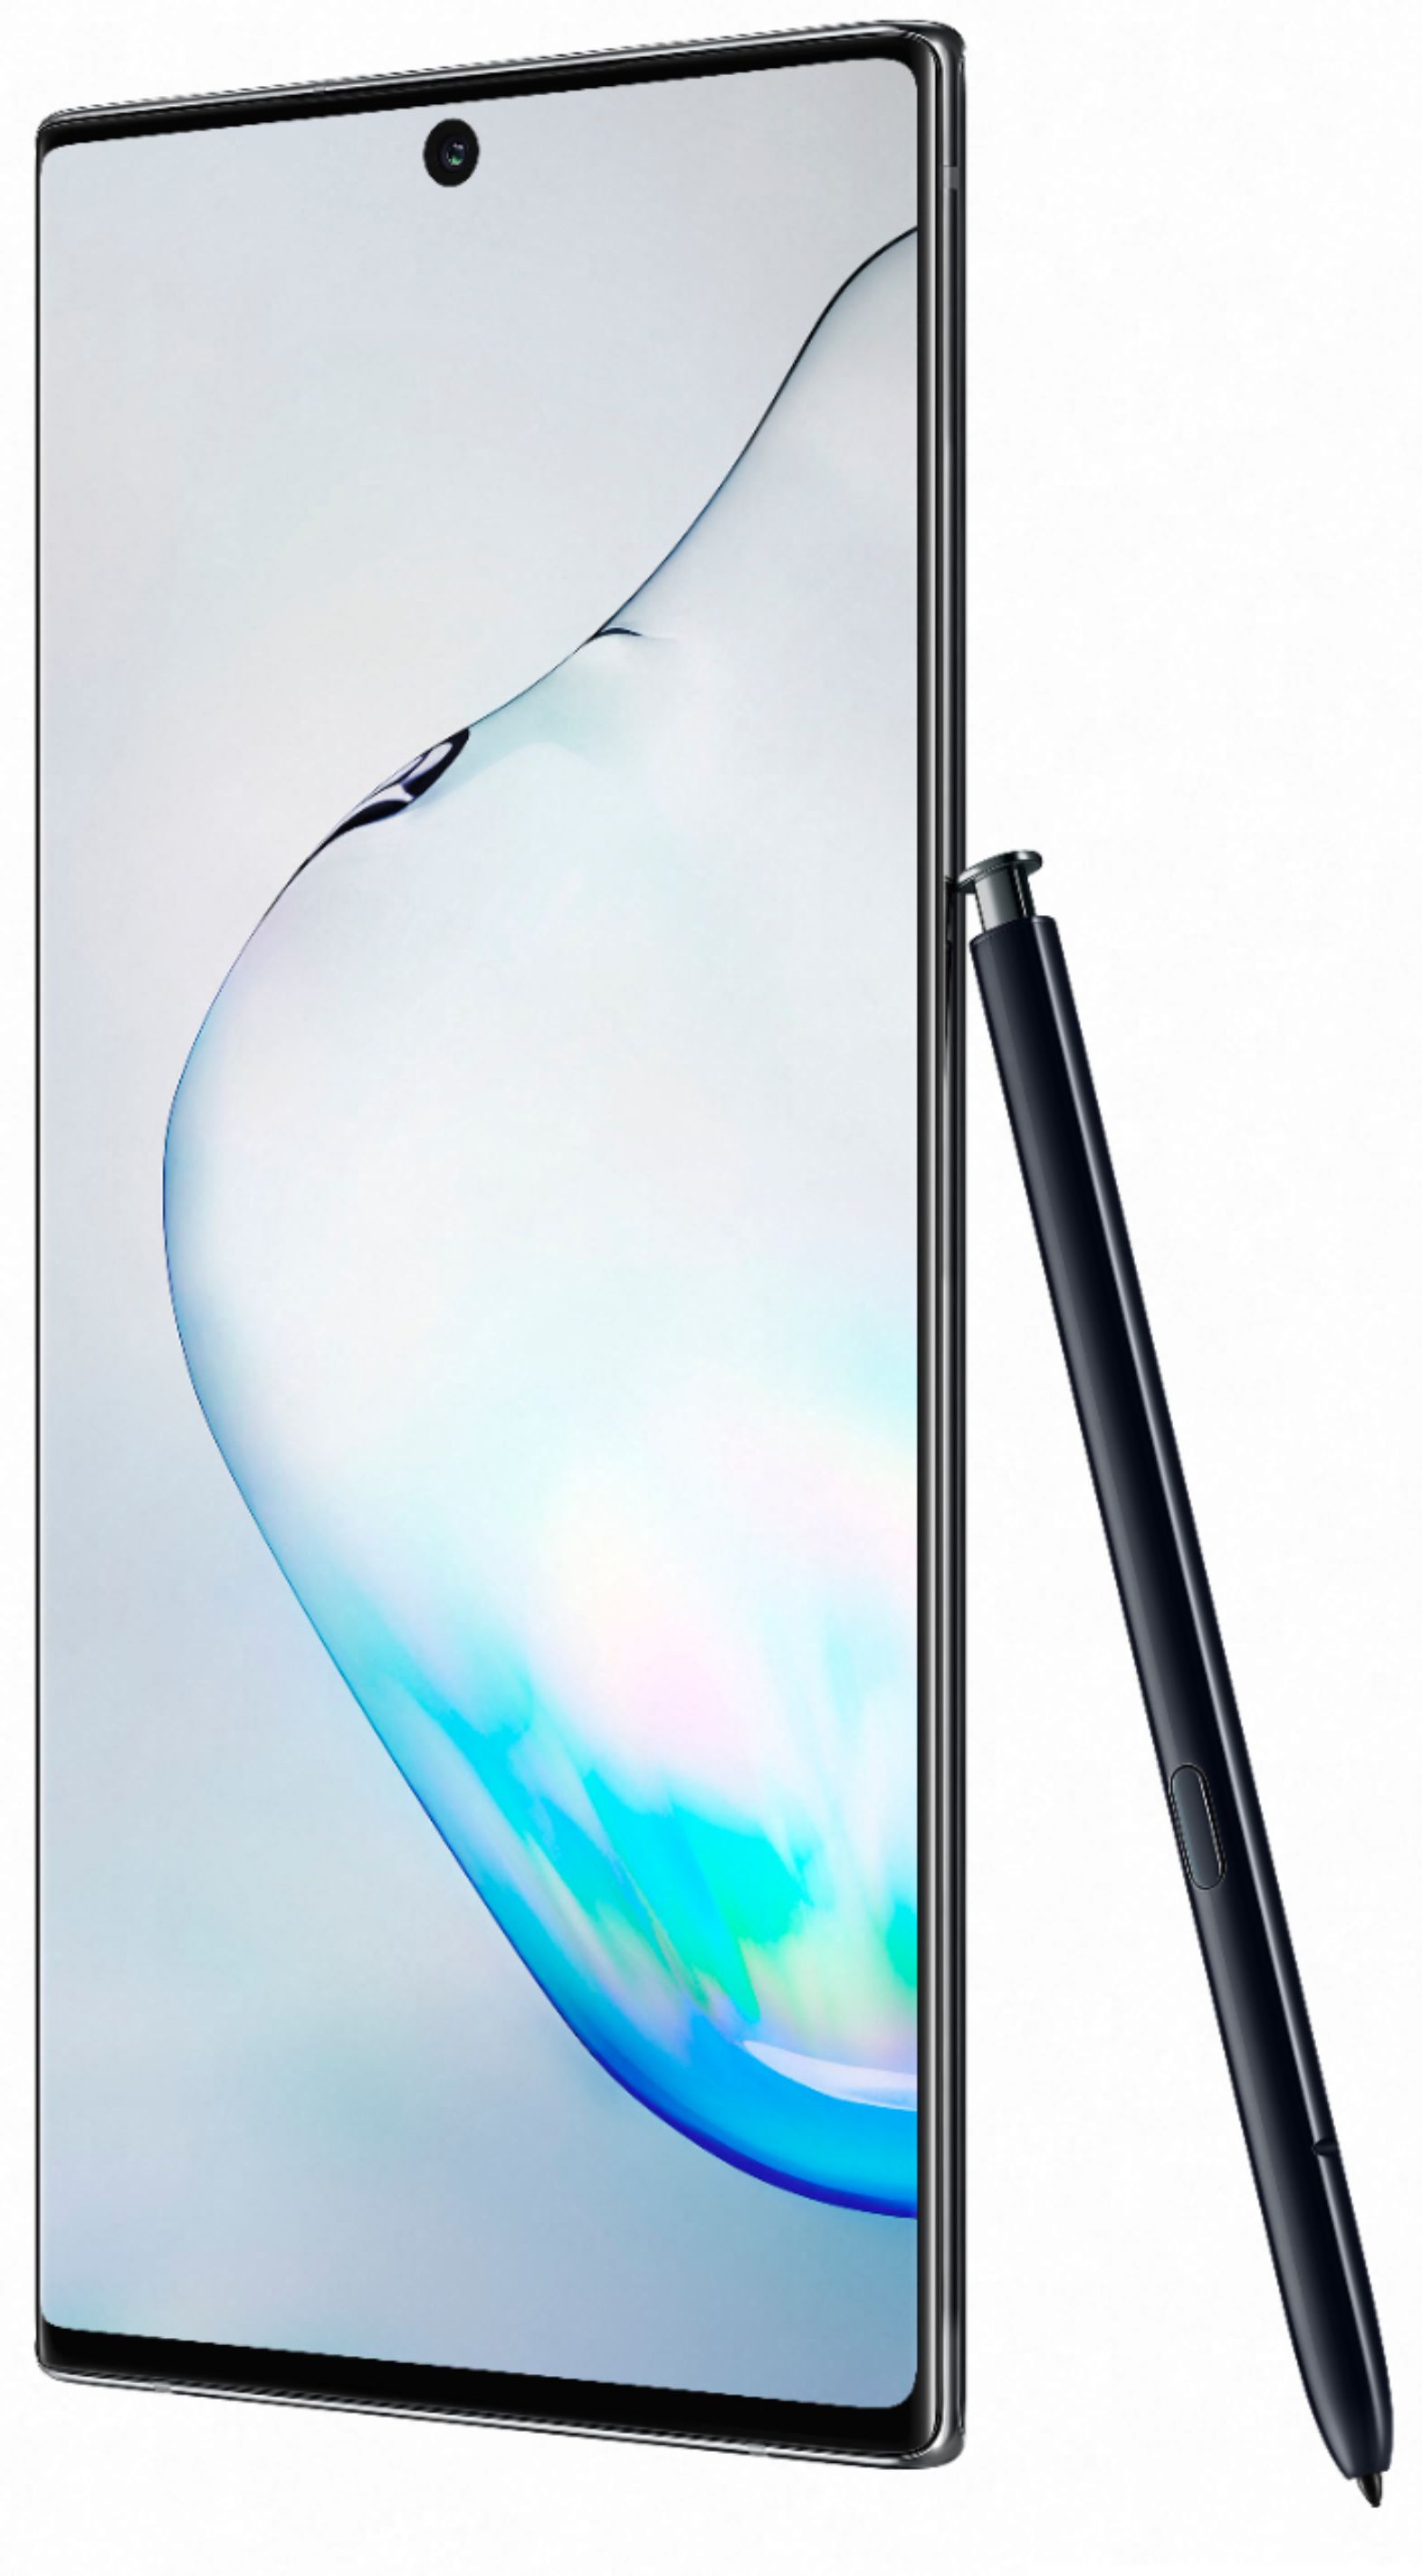 Samsung Galaxy Note10 for Sale  Buy New, Used, & Certified Refurbished  from